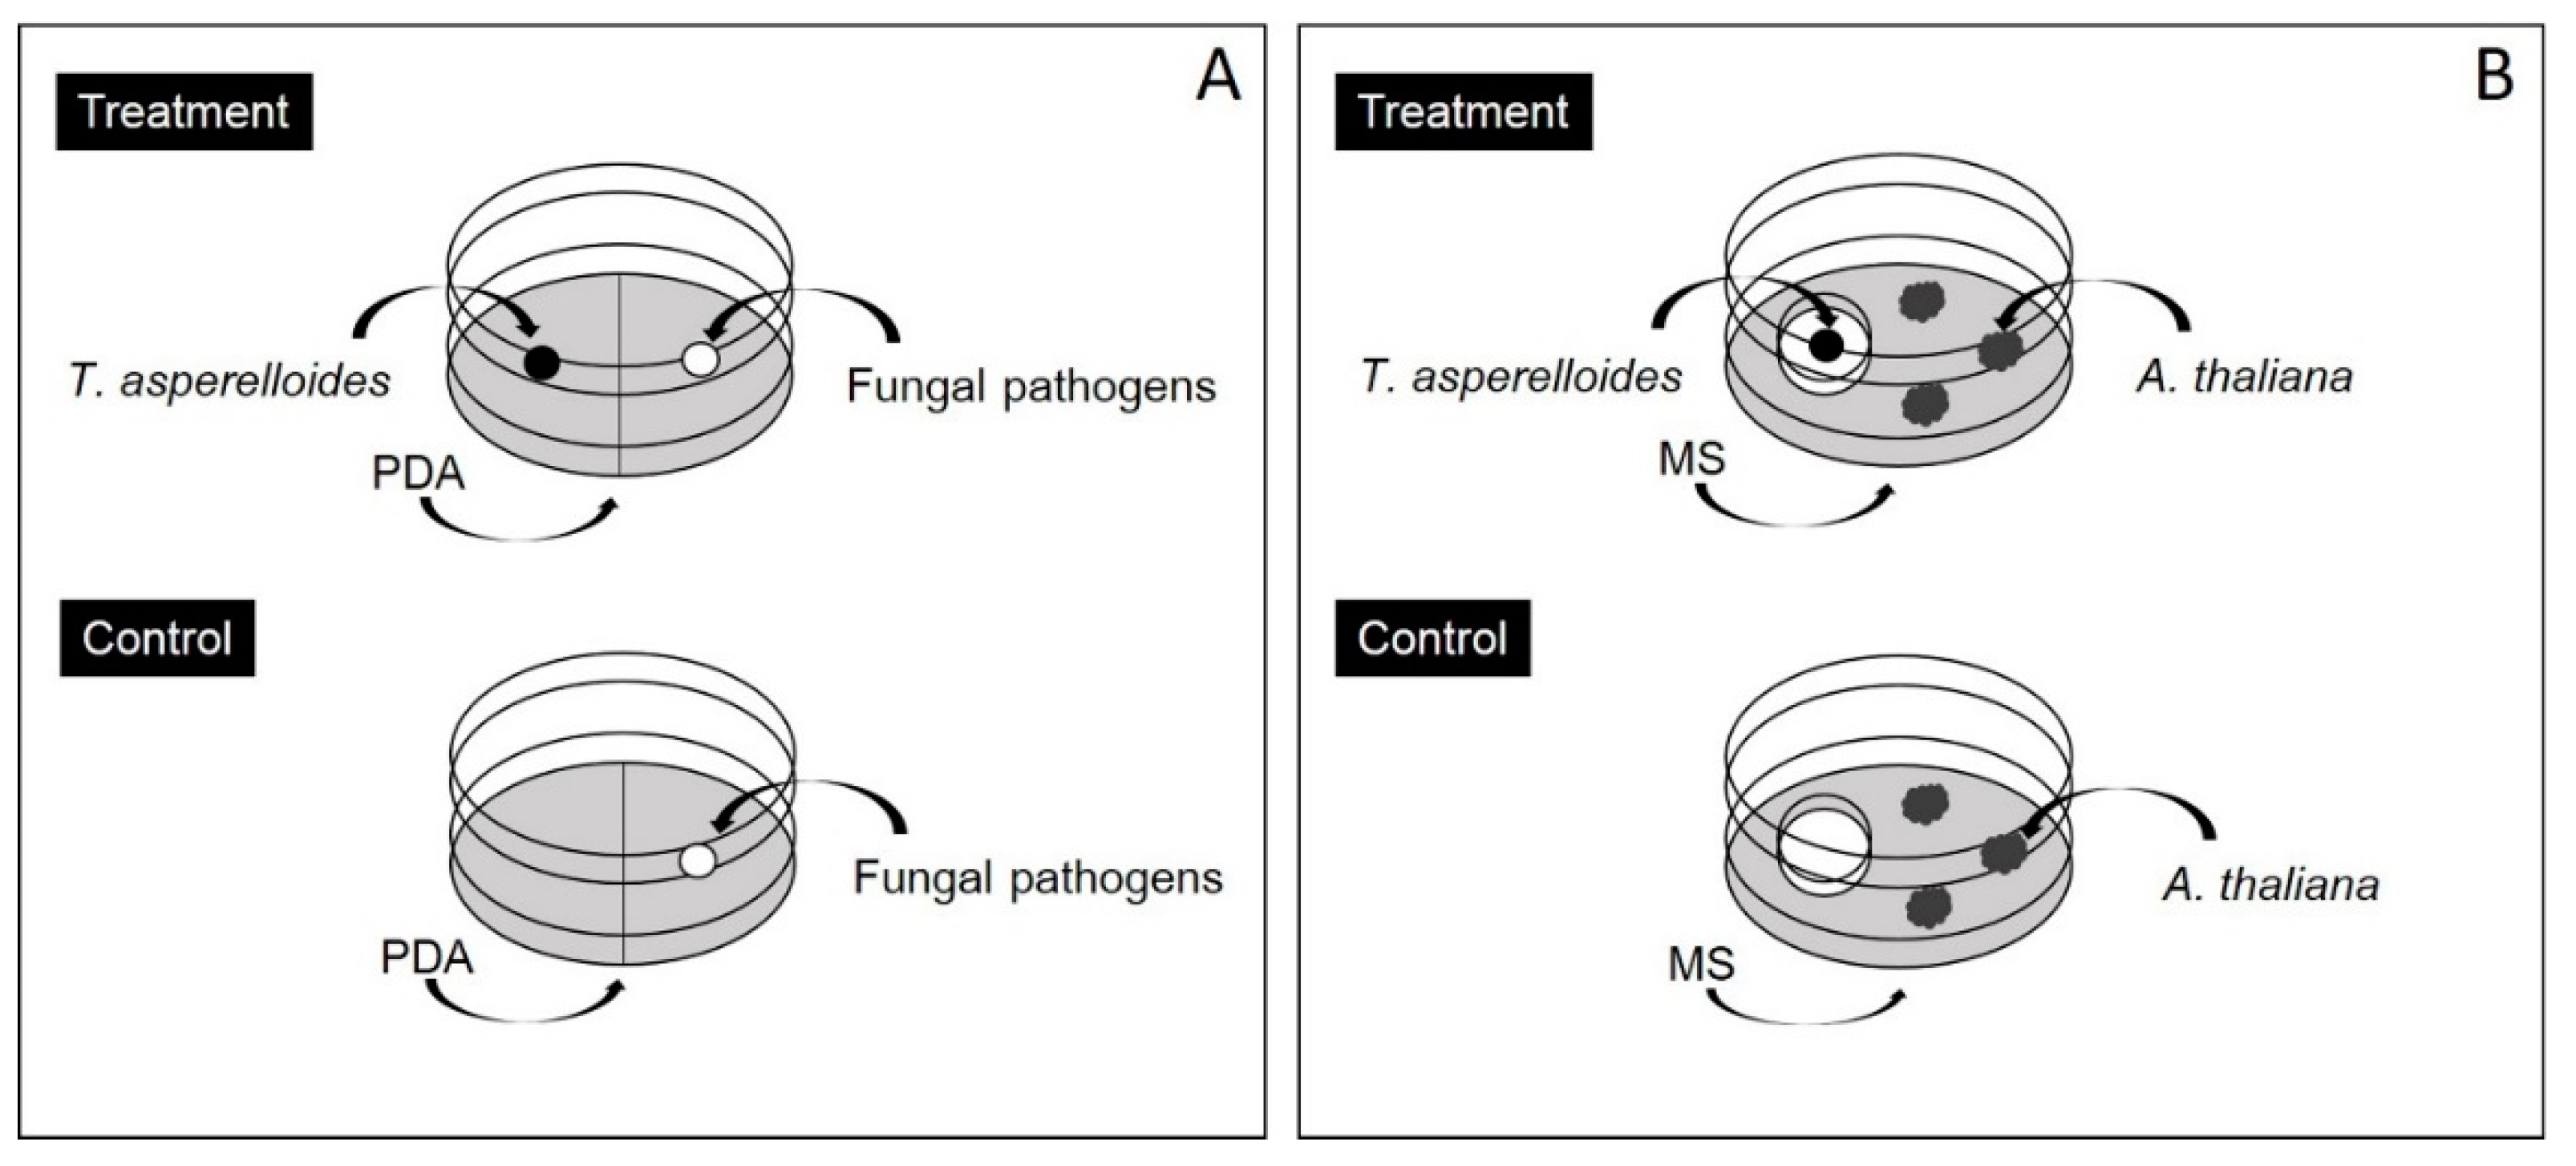 PDF) Antifungal activity of volatile compounds generated by